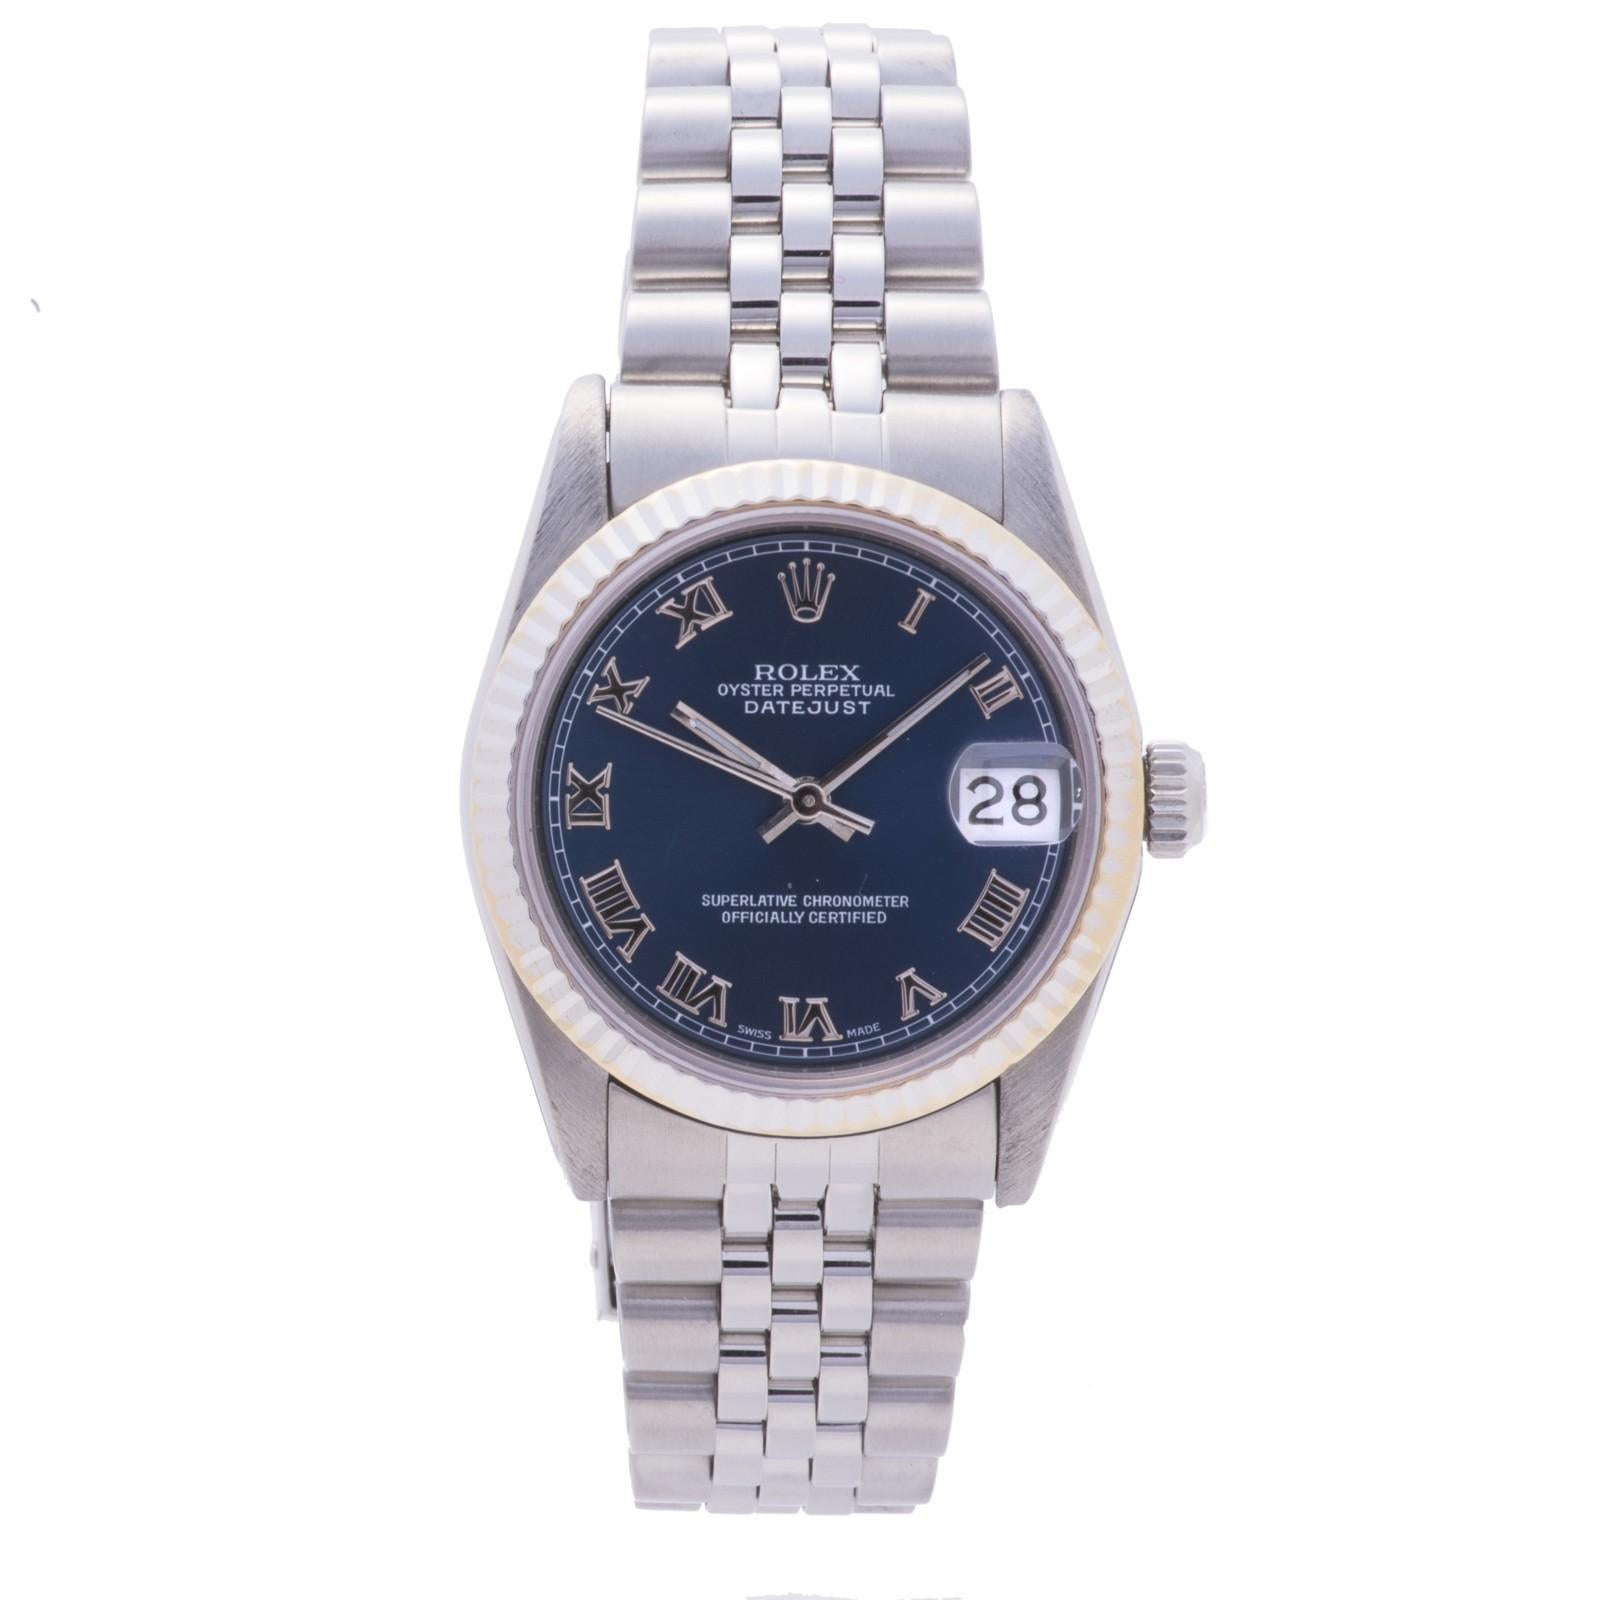 Certified 1983 Rolex Datejust 68240 Black Dial For Sale